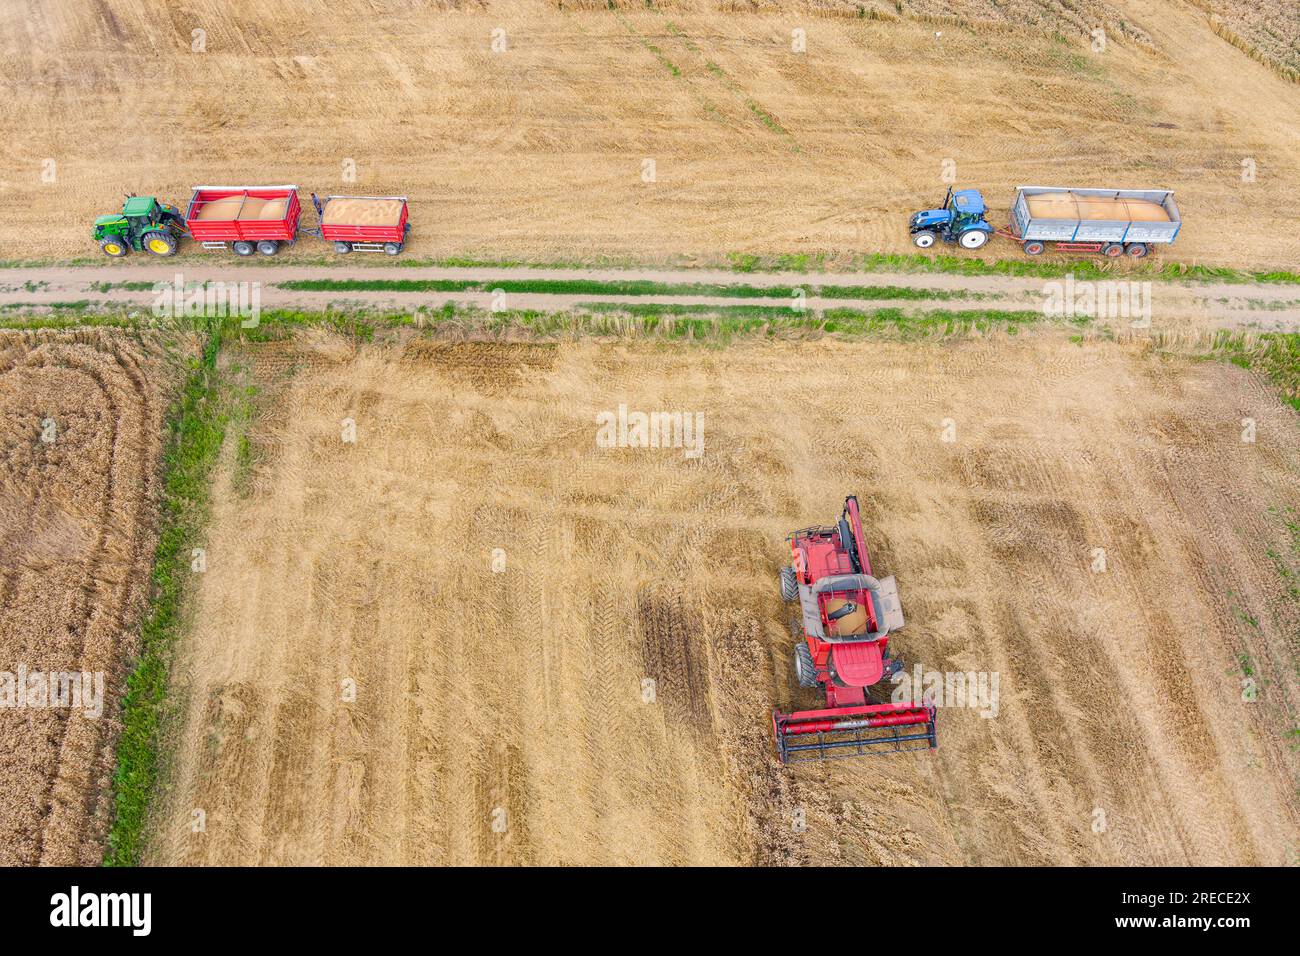 Combine harvester working on the wheat field. Agriculture aerial view Stock Photo